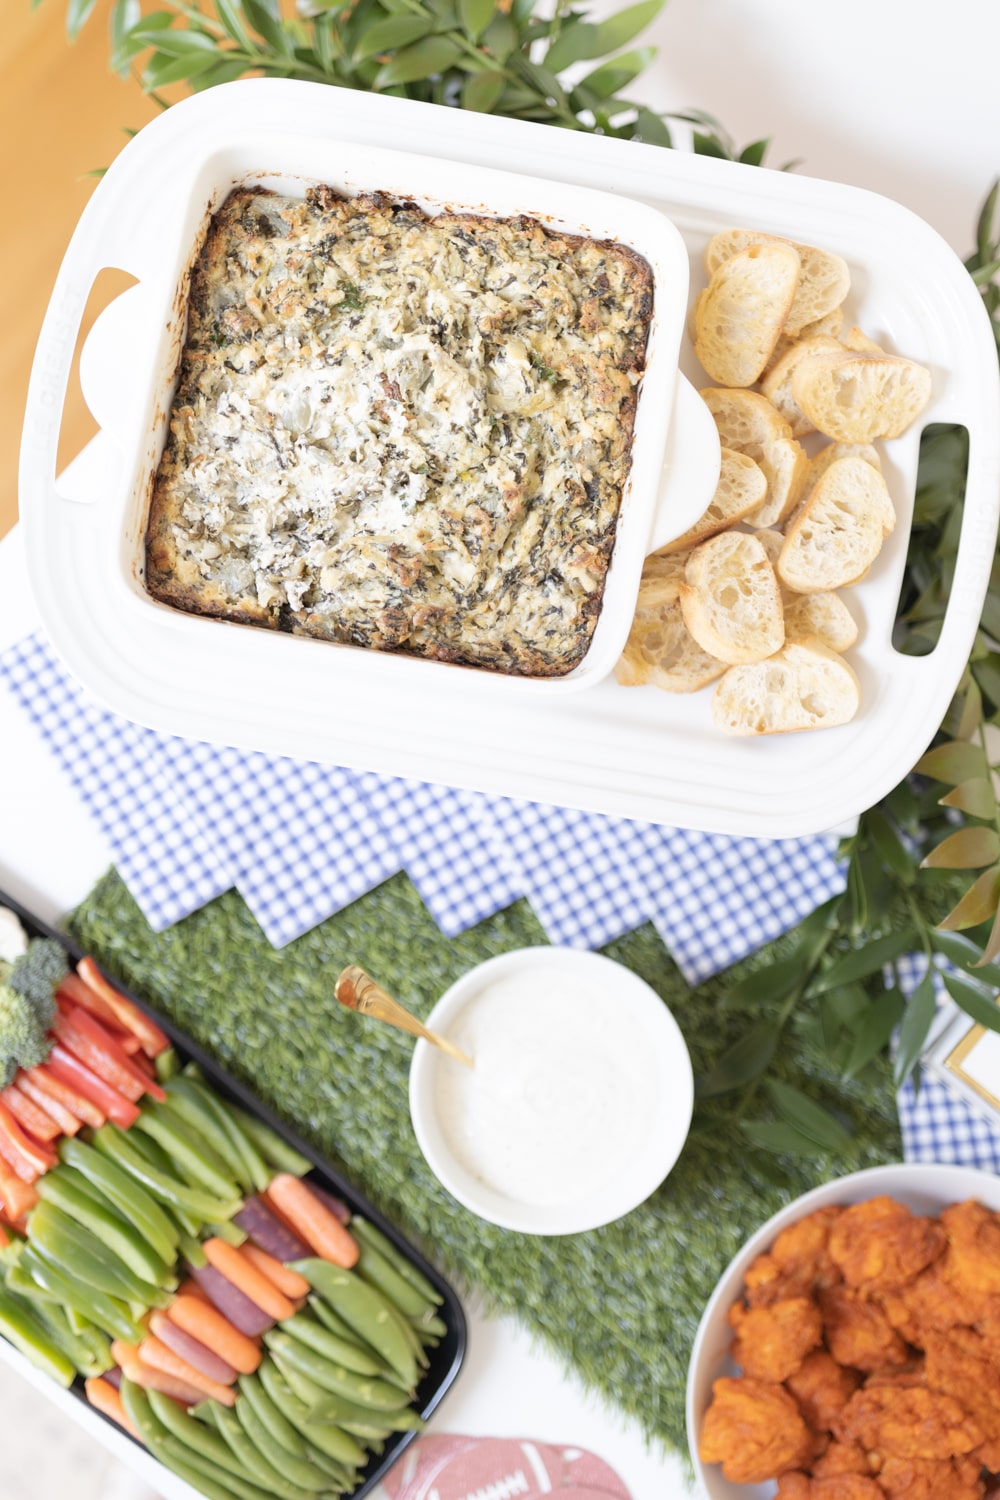 Blogger Stephanie Ziajka shows what to serve with baked spinach dip on Diary of a Debutante